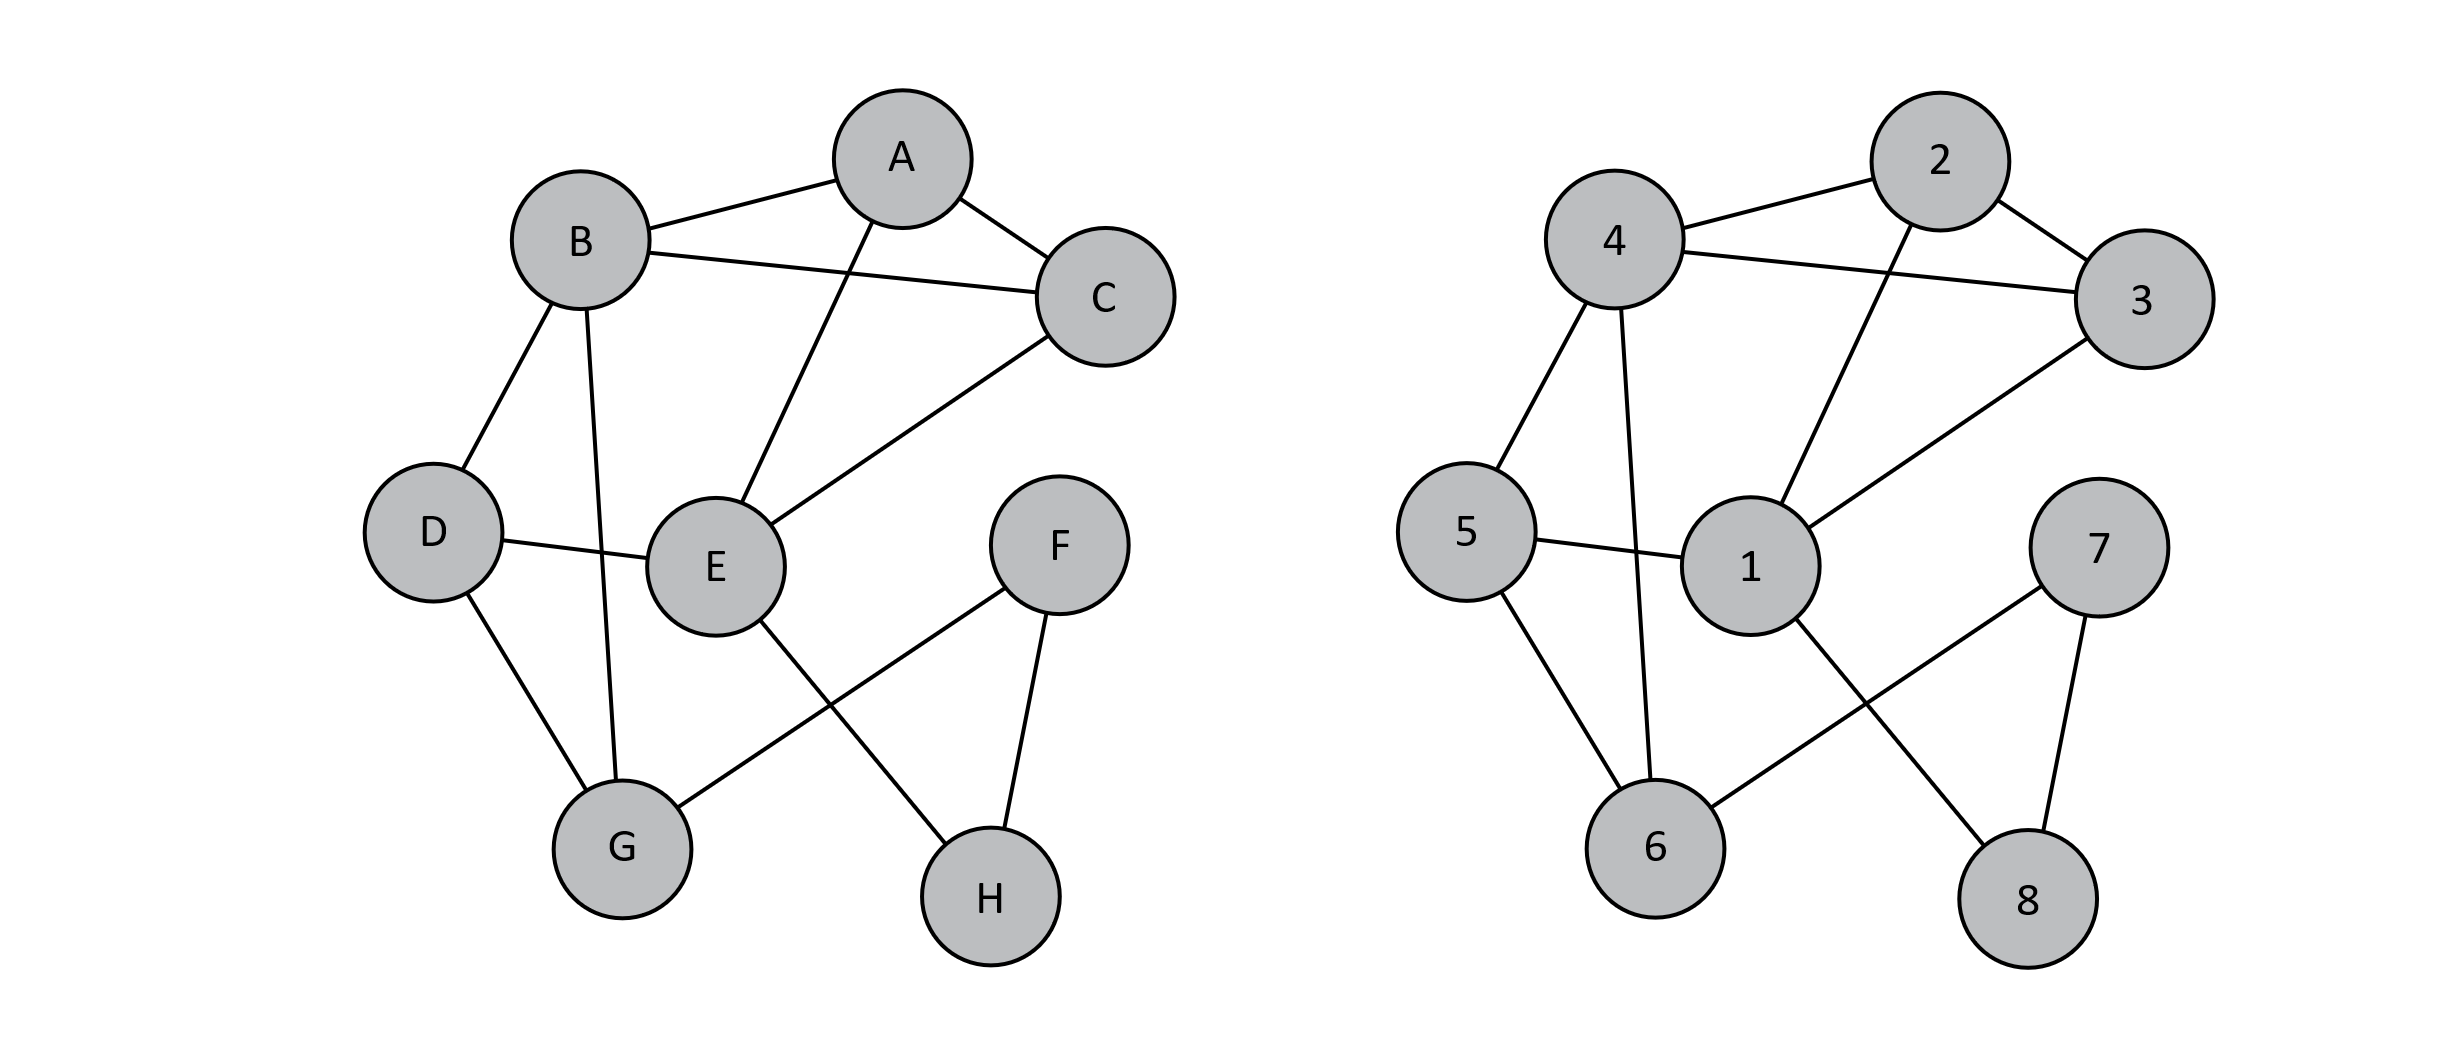 Two graphs, one with the ordering of the Hamiltonian cycle numbered in sequence.